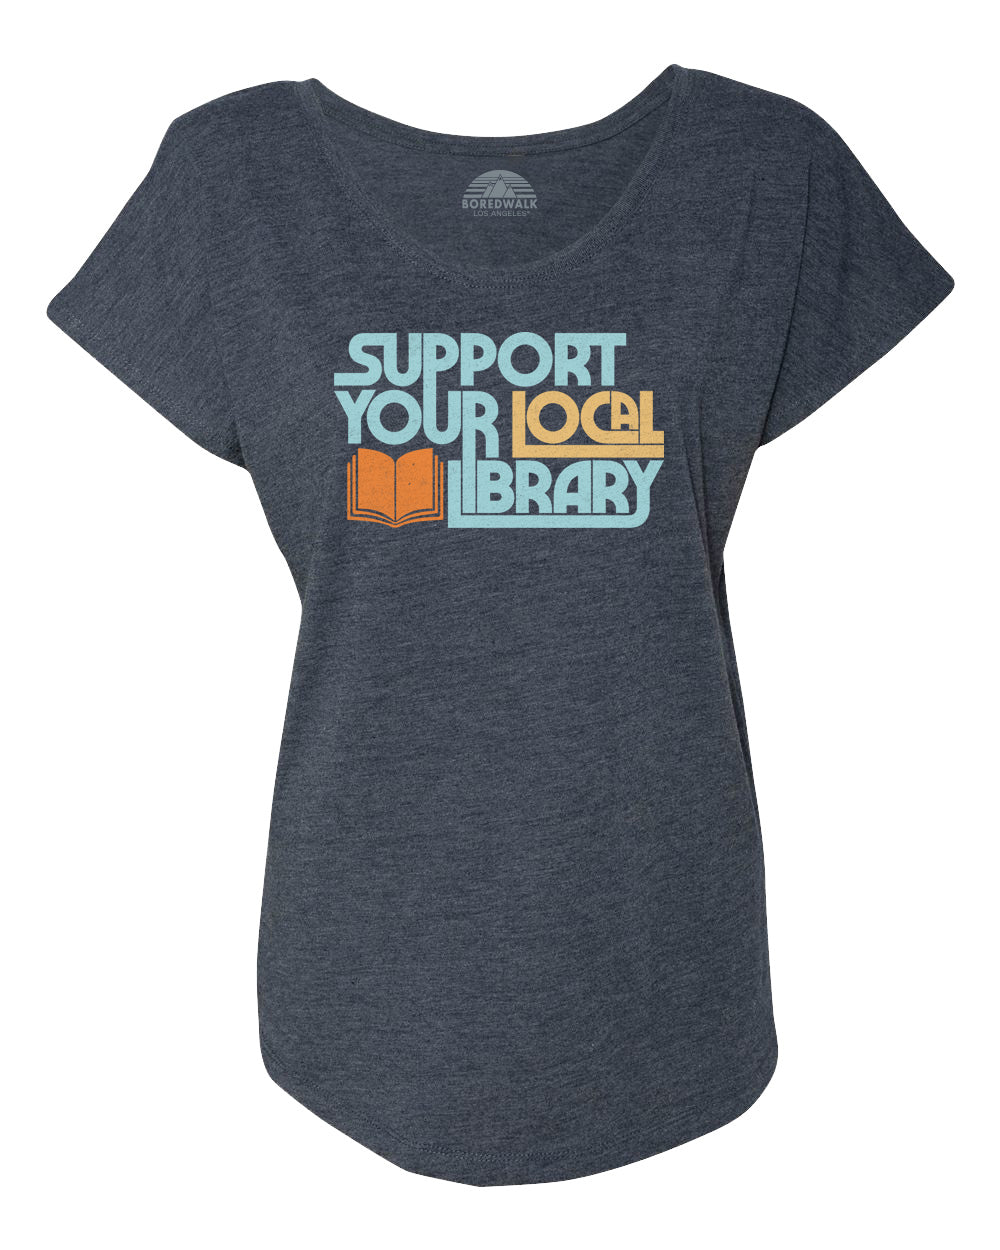 Women's Support Your Local Library Scoop Neck T-Shirt